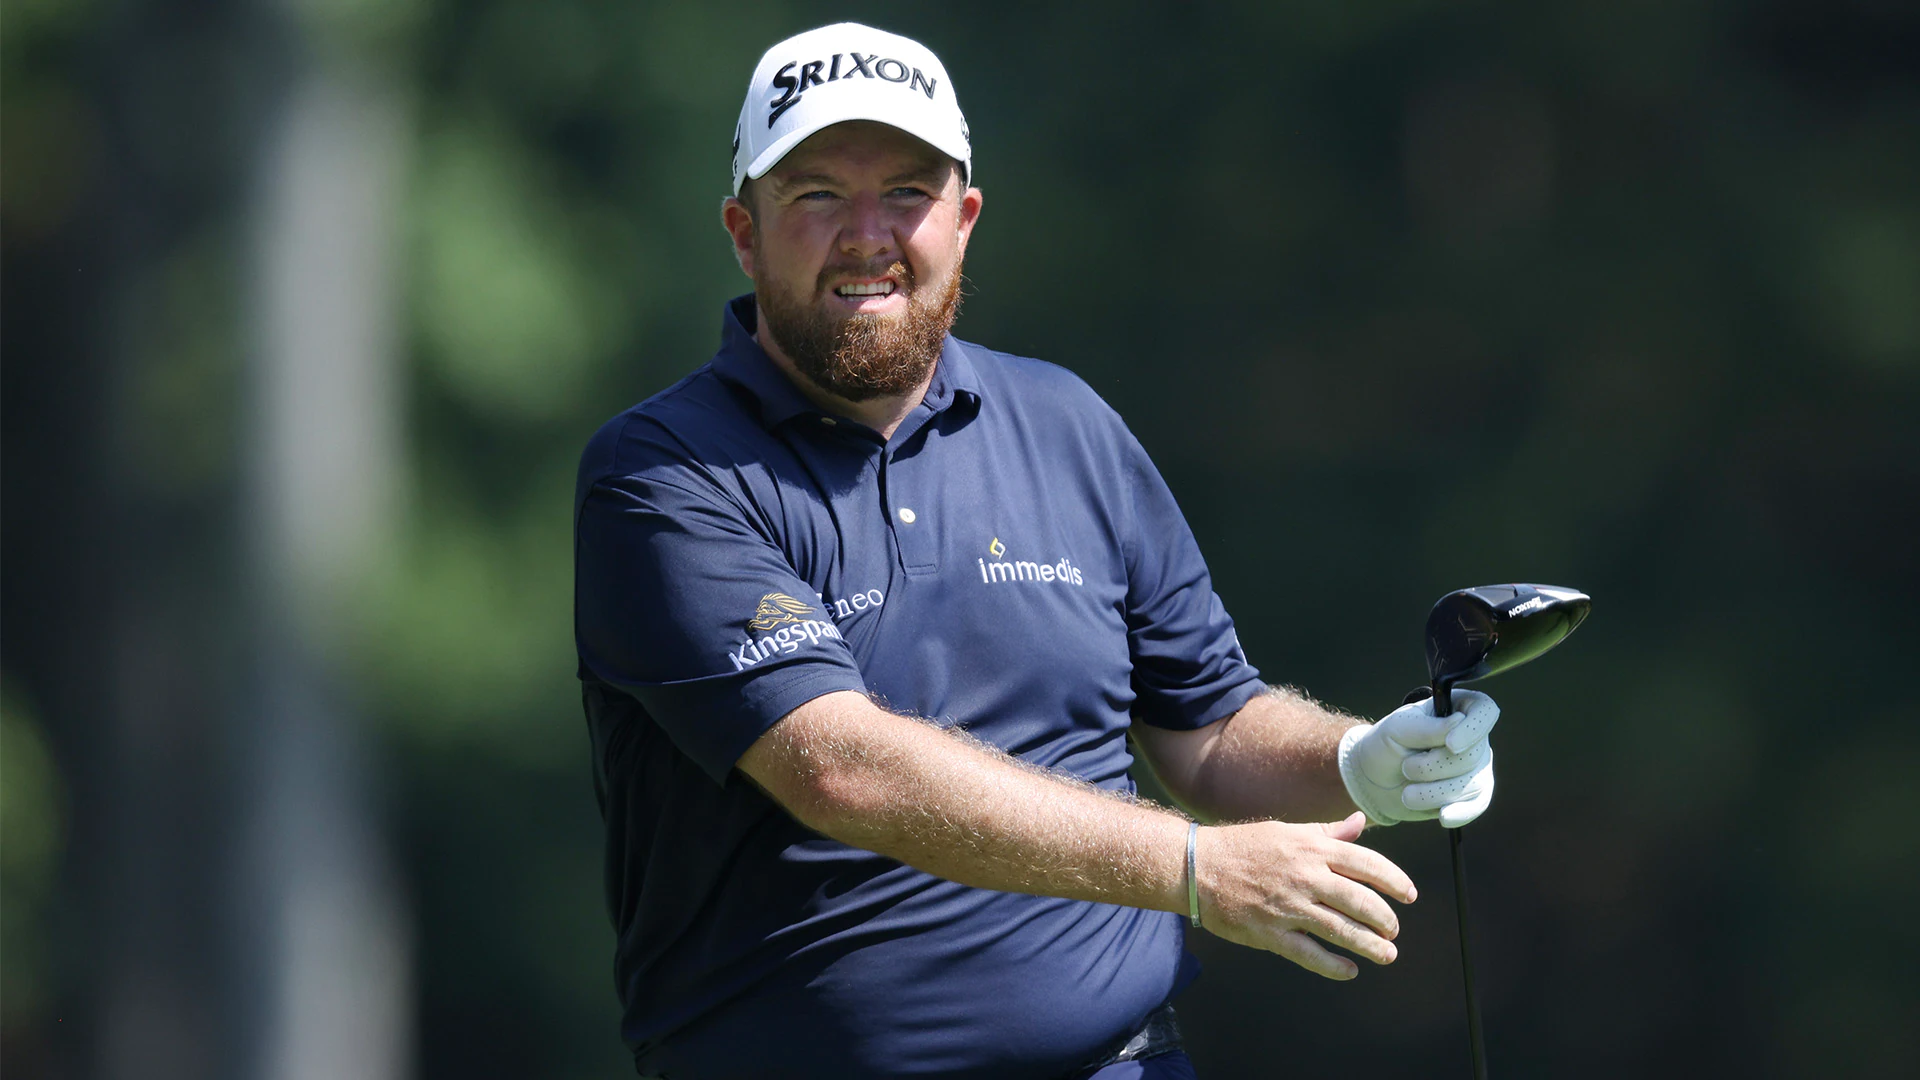 Shane Lowry didn’t qualify for Tour Championship, but looking forward to Ryder Cup